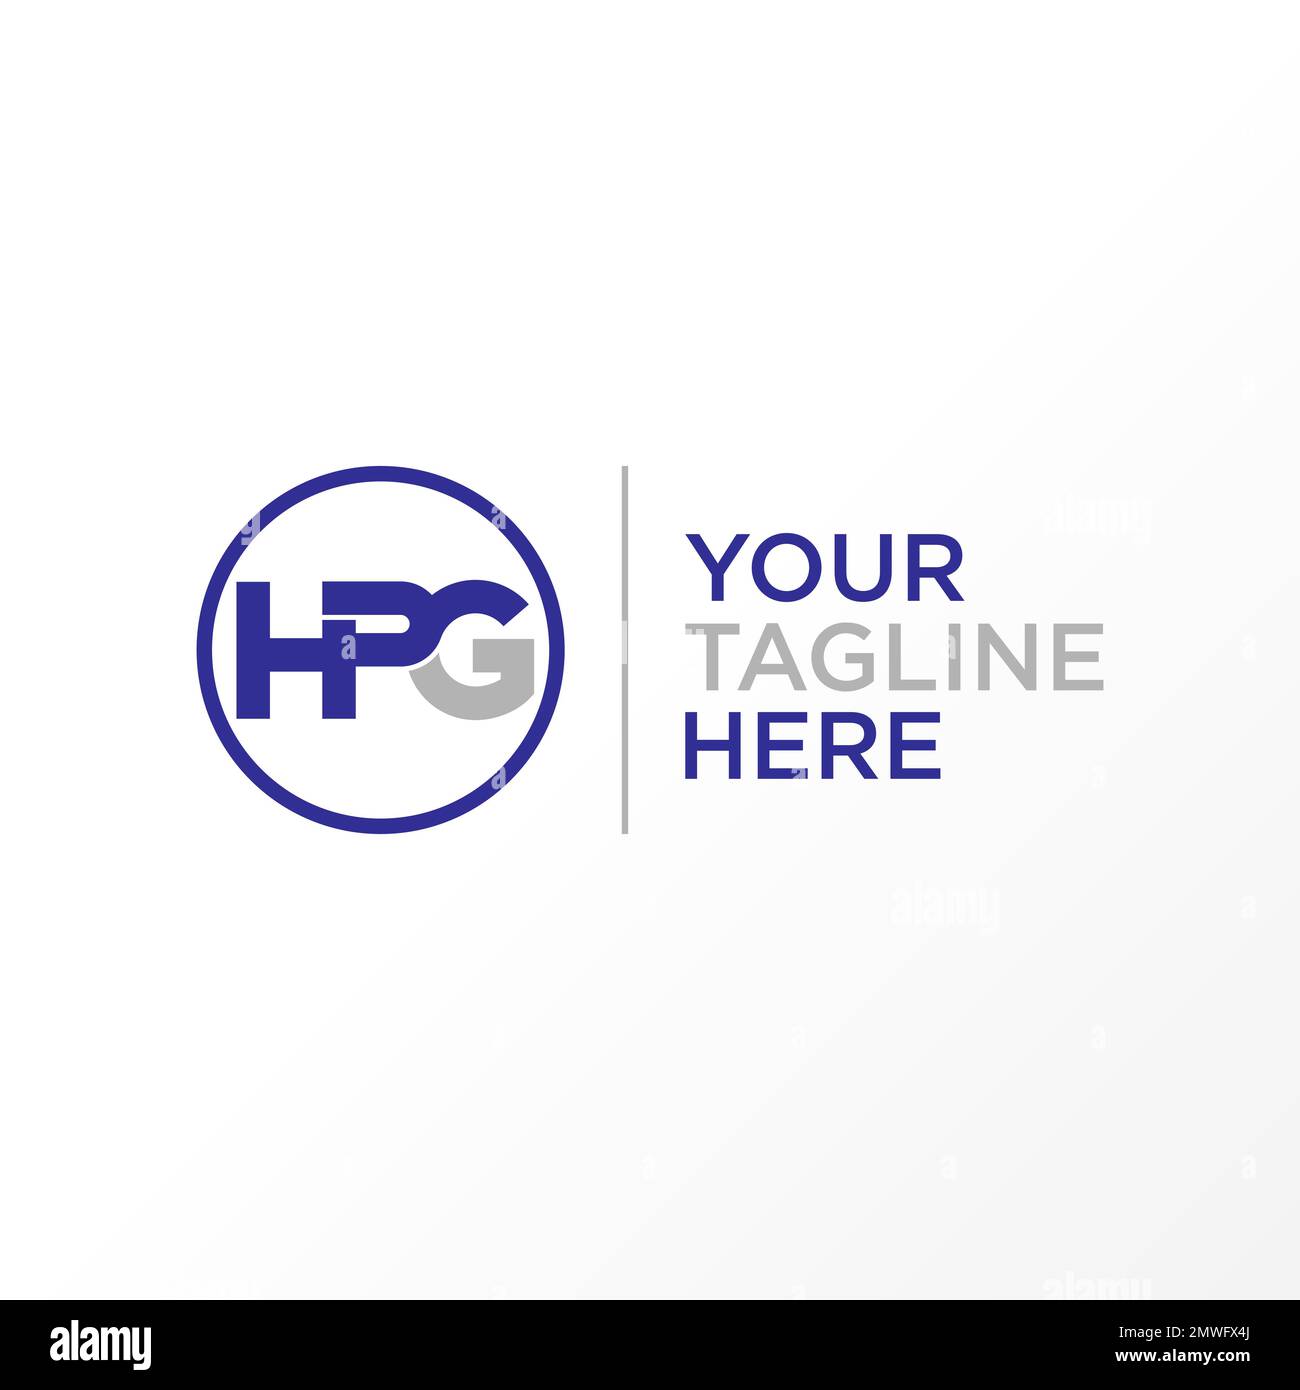 Letter or word HPG sans serif font in merging or connecting image graphic icon logo design abstract concept vector stock symbol related to initial. Stock Vector